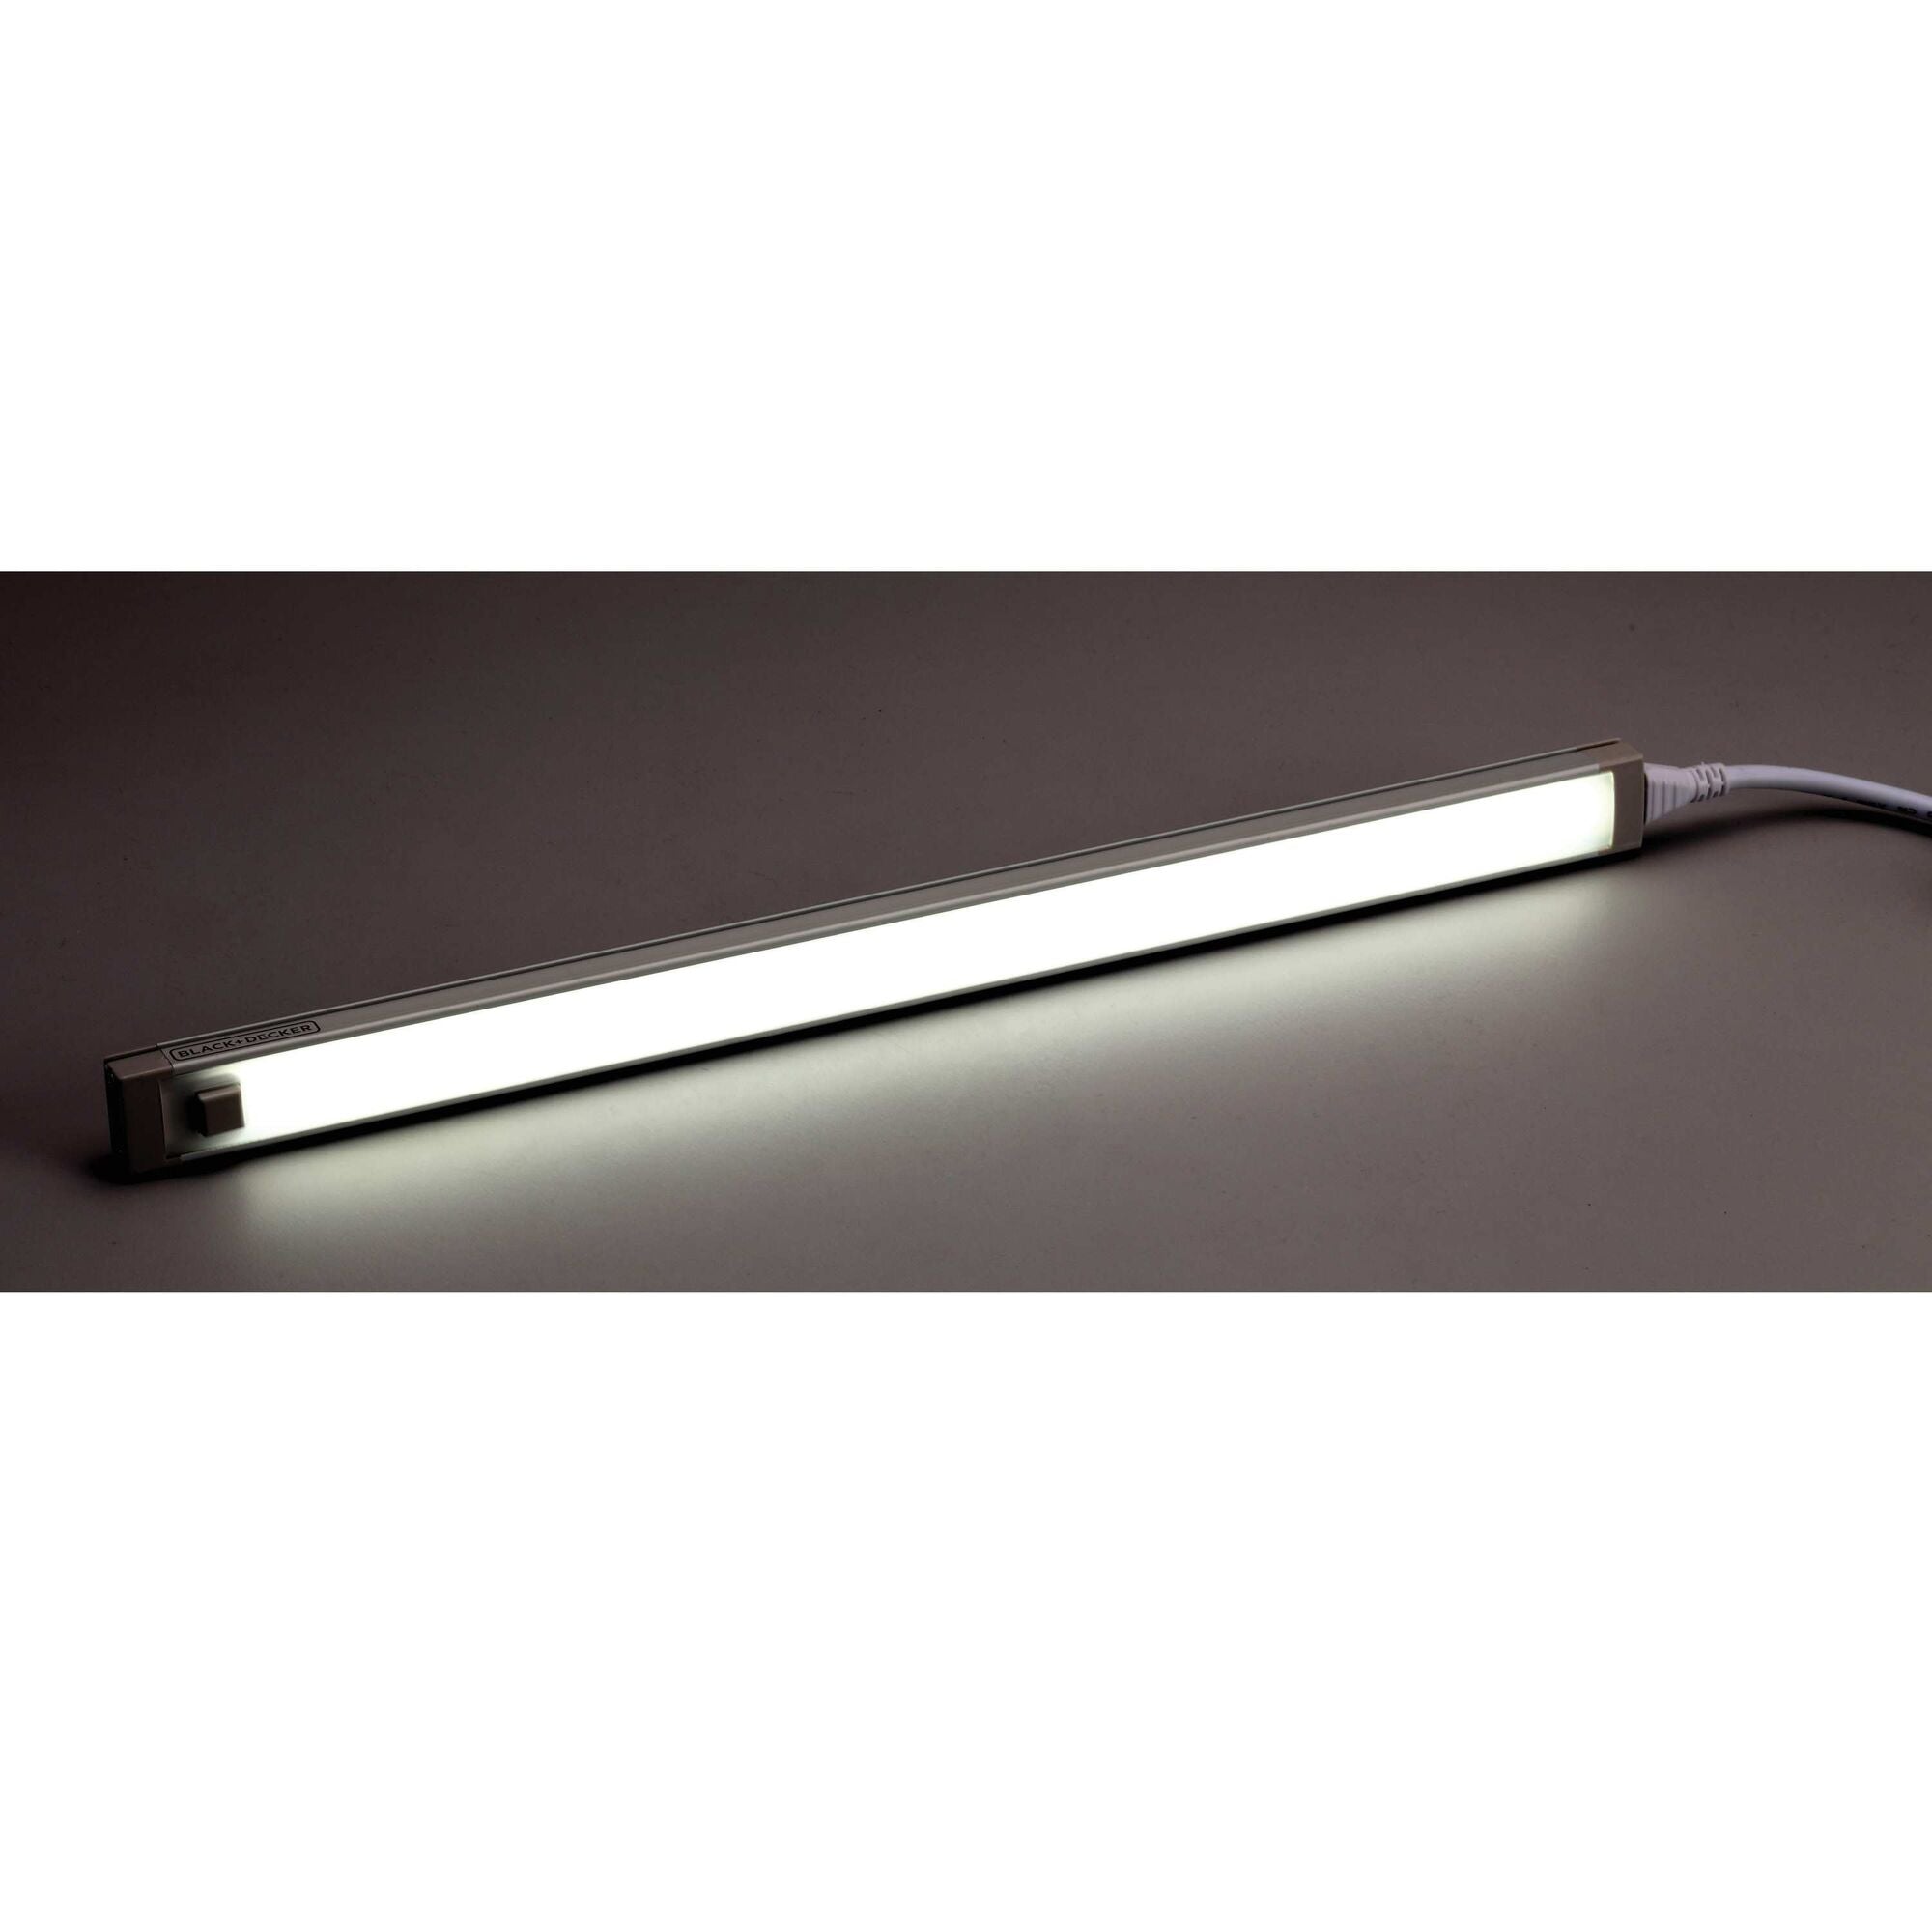 1 bar LED Under Cabinet Lighting kit cool white 18 inch in use.